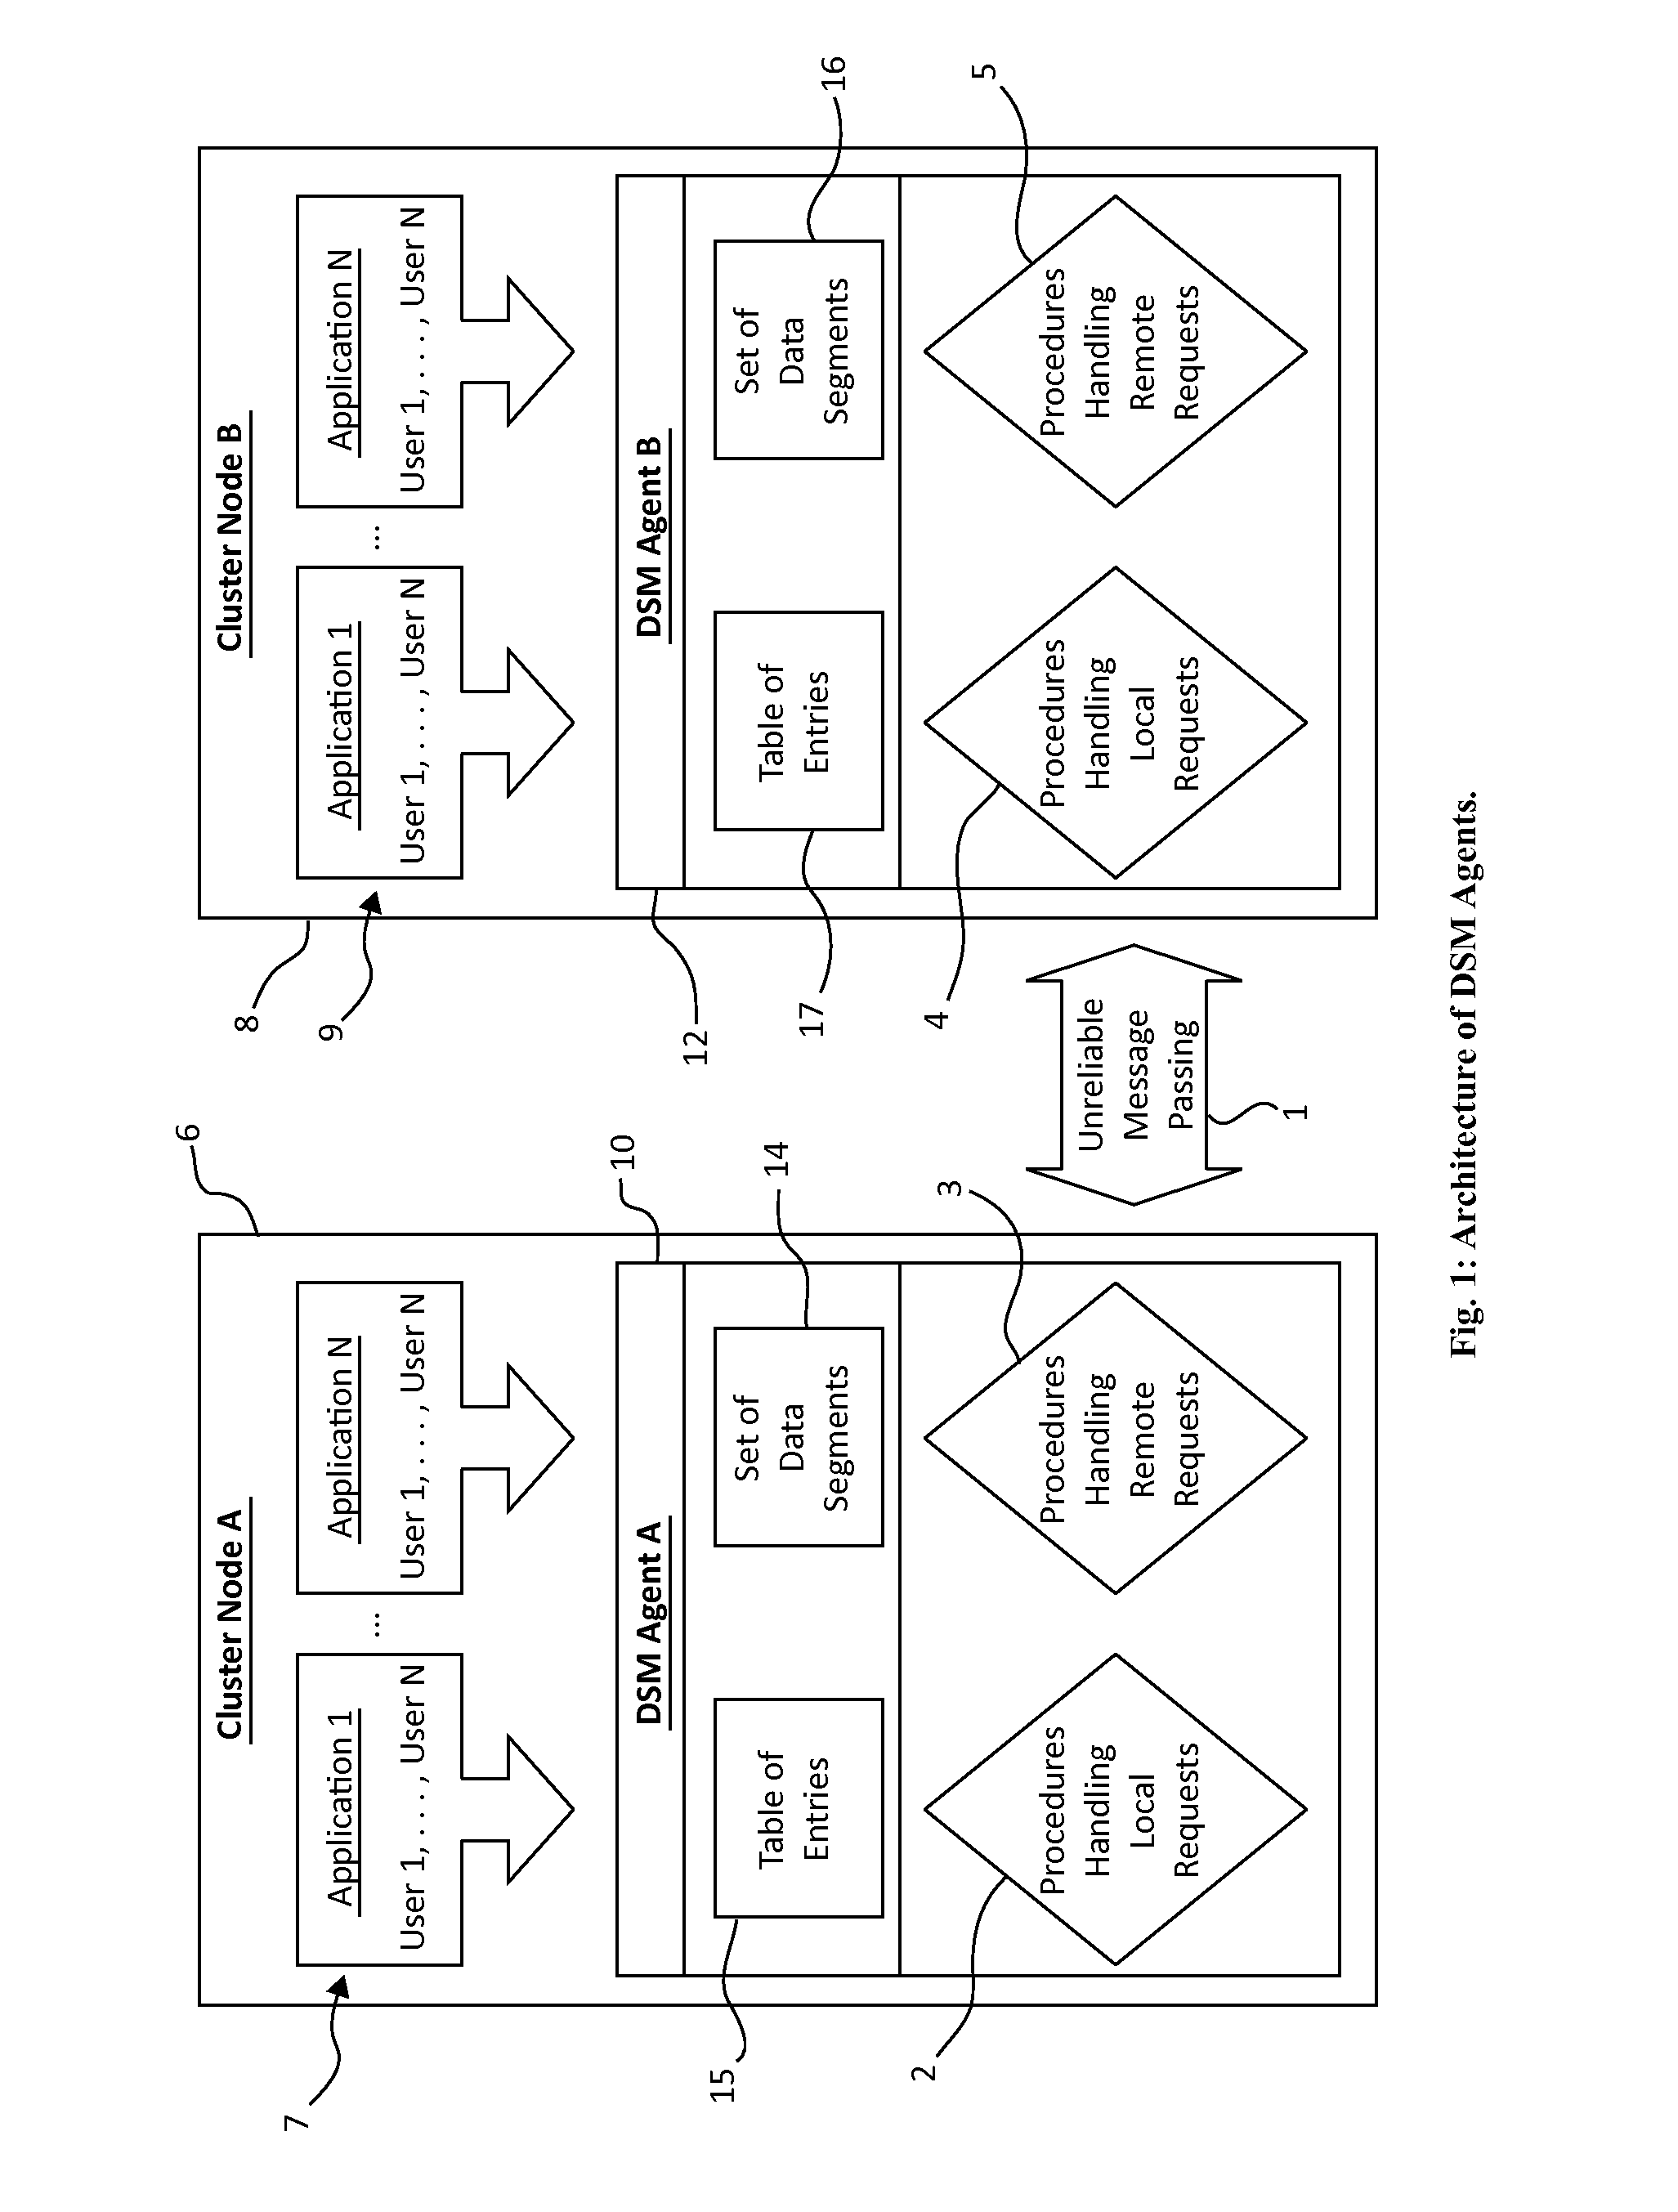 Transactional processing for clustered file systems